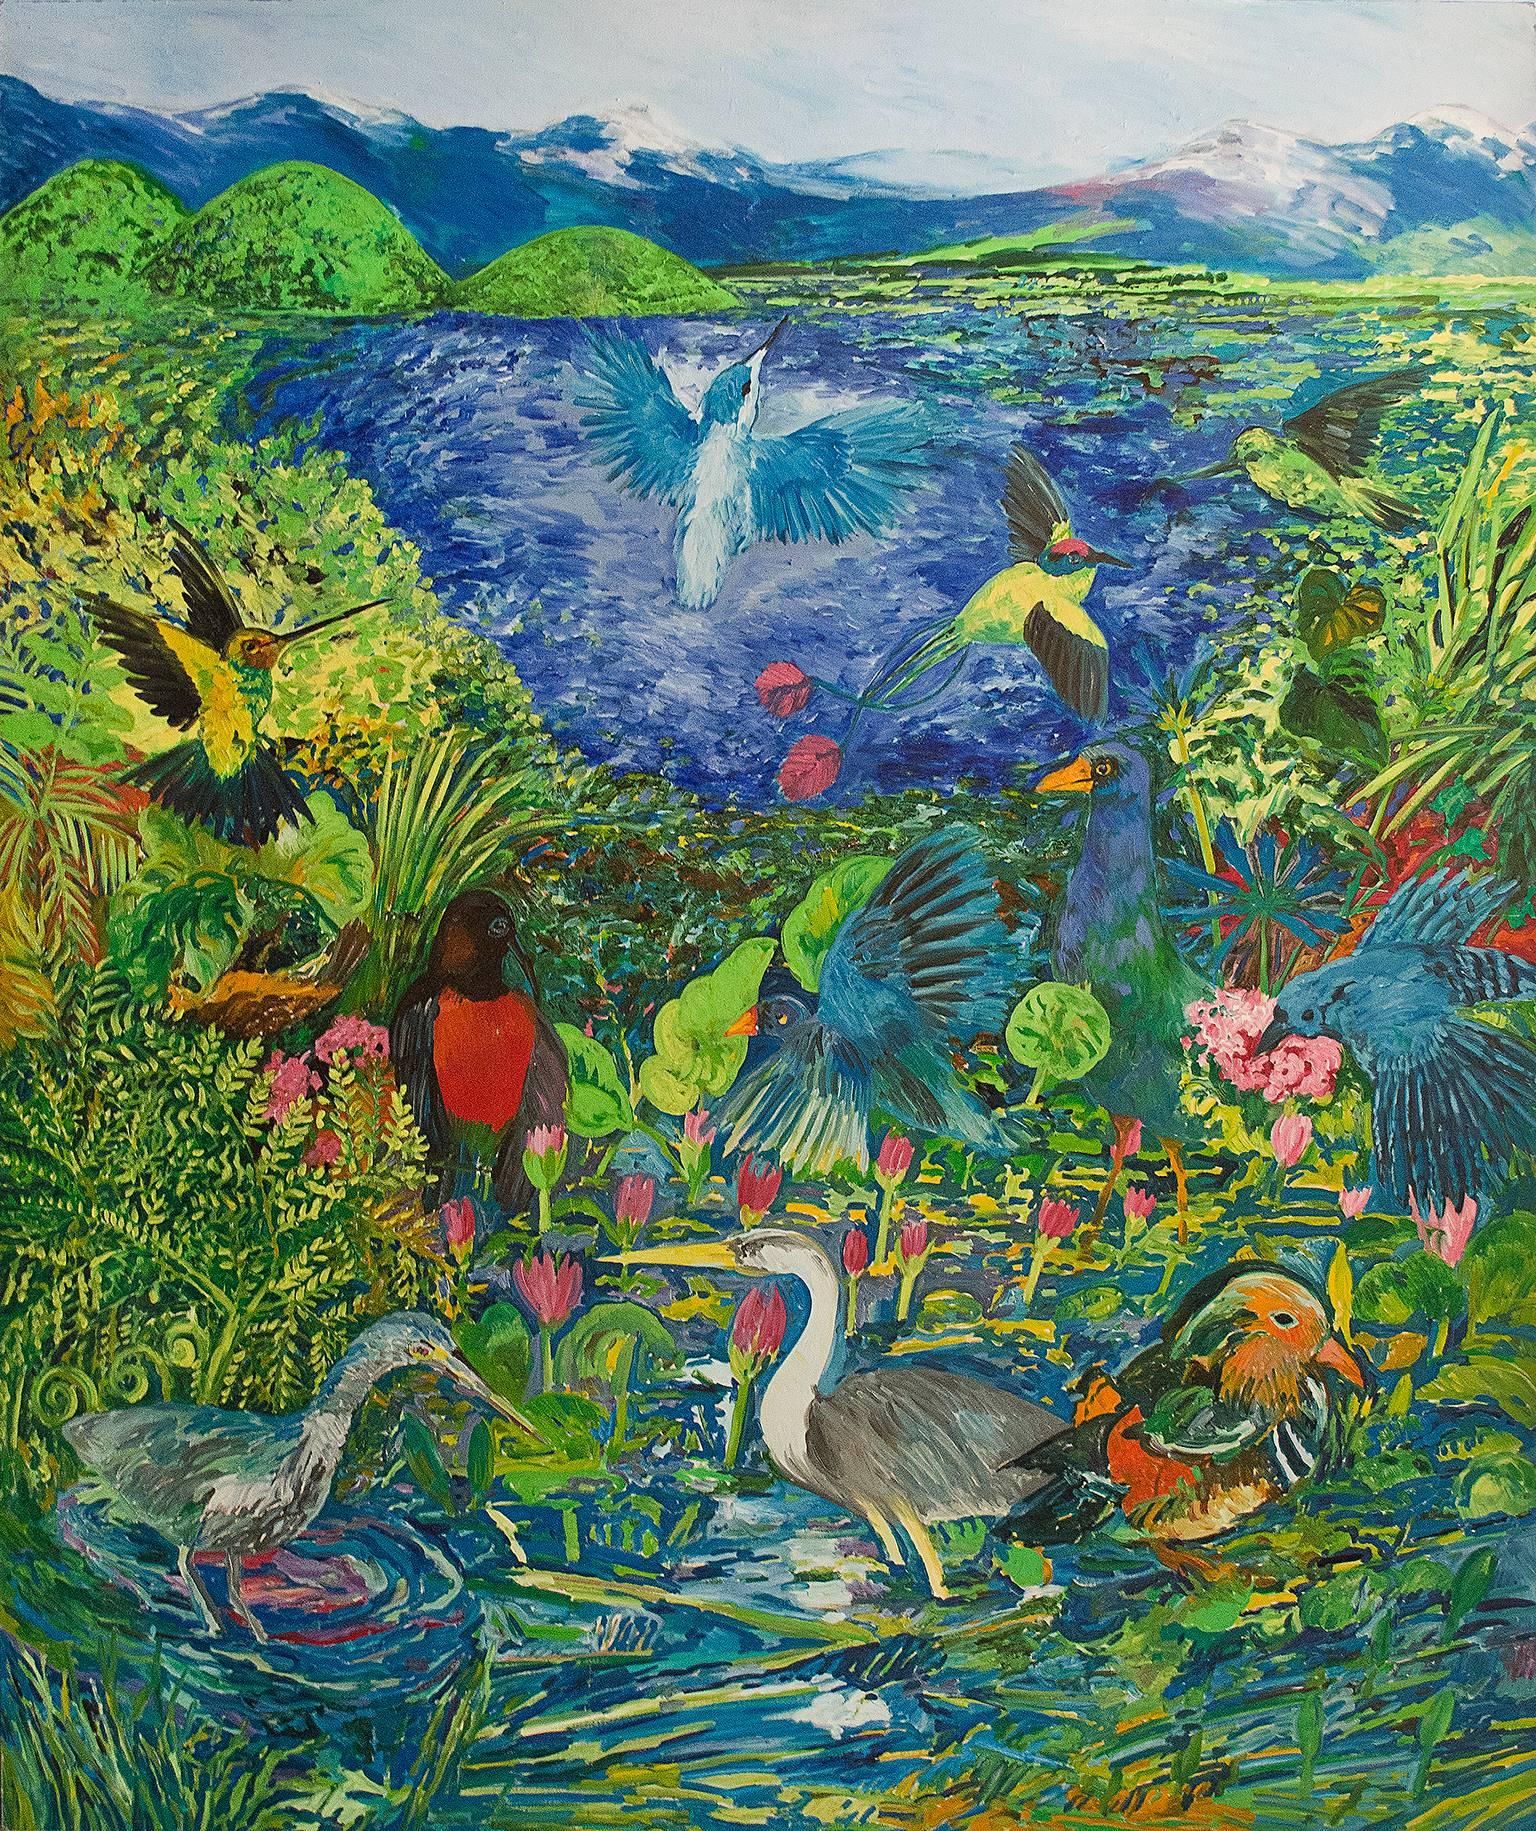 "To Eternity" is an original oil painting on canvas by Hunt Slonem. The artist signed the piece on the back of the canvas. It depicts a number of exotic birds in a tropical and lush oasis. The colors are bright and the brushstrokes are expressive,